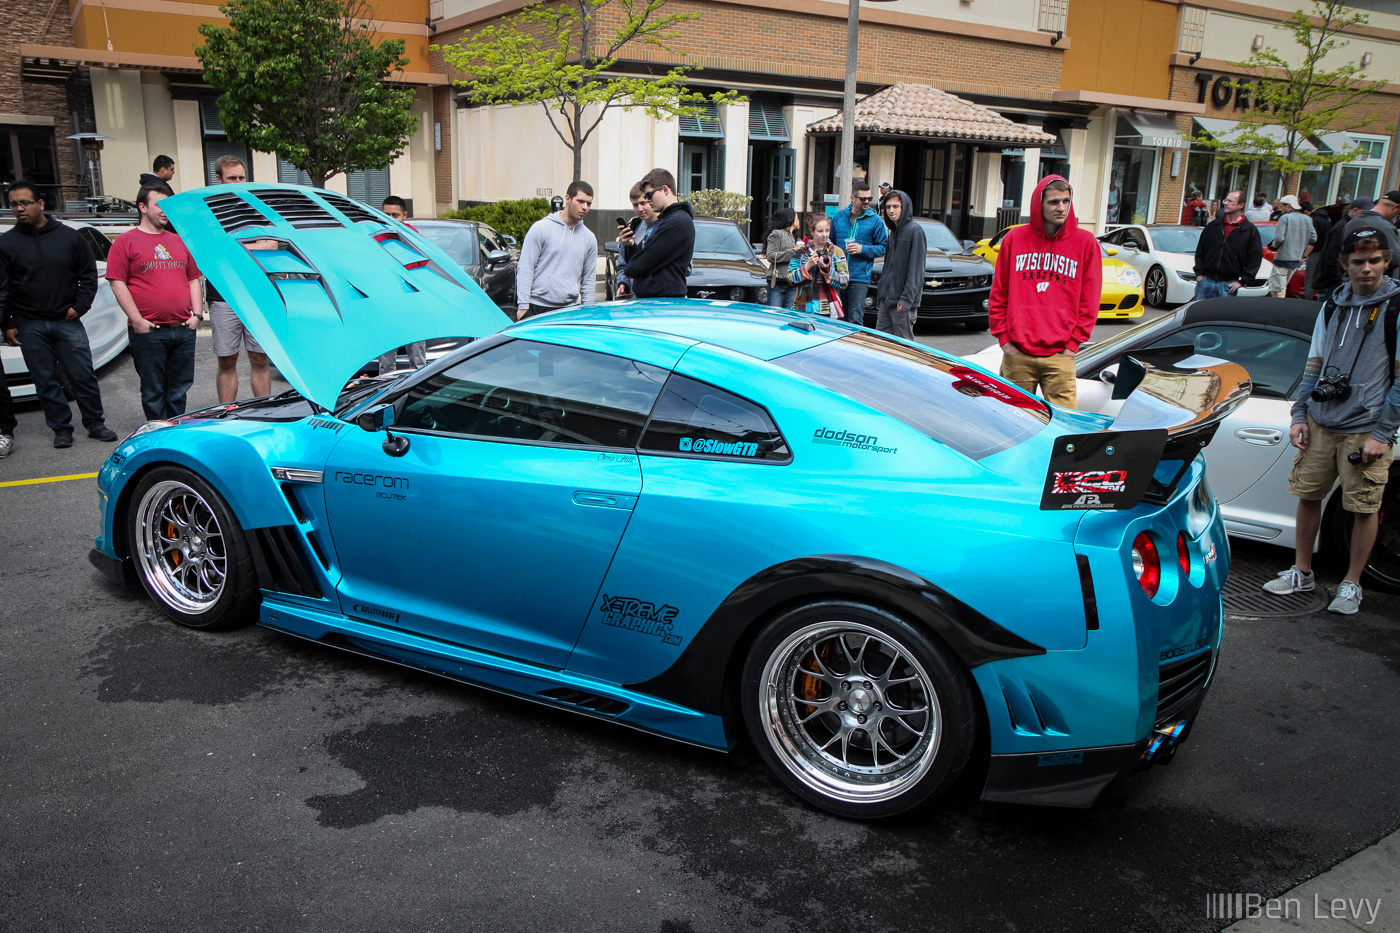 Modified Nissan GT-R at Car Meet in Bolingbrook